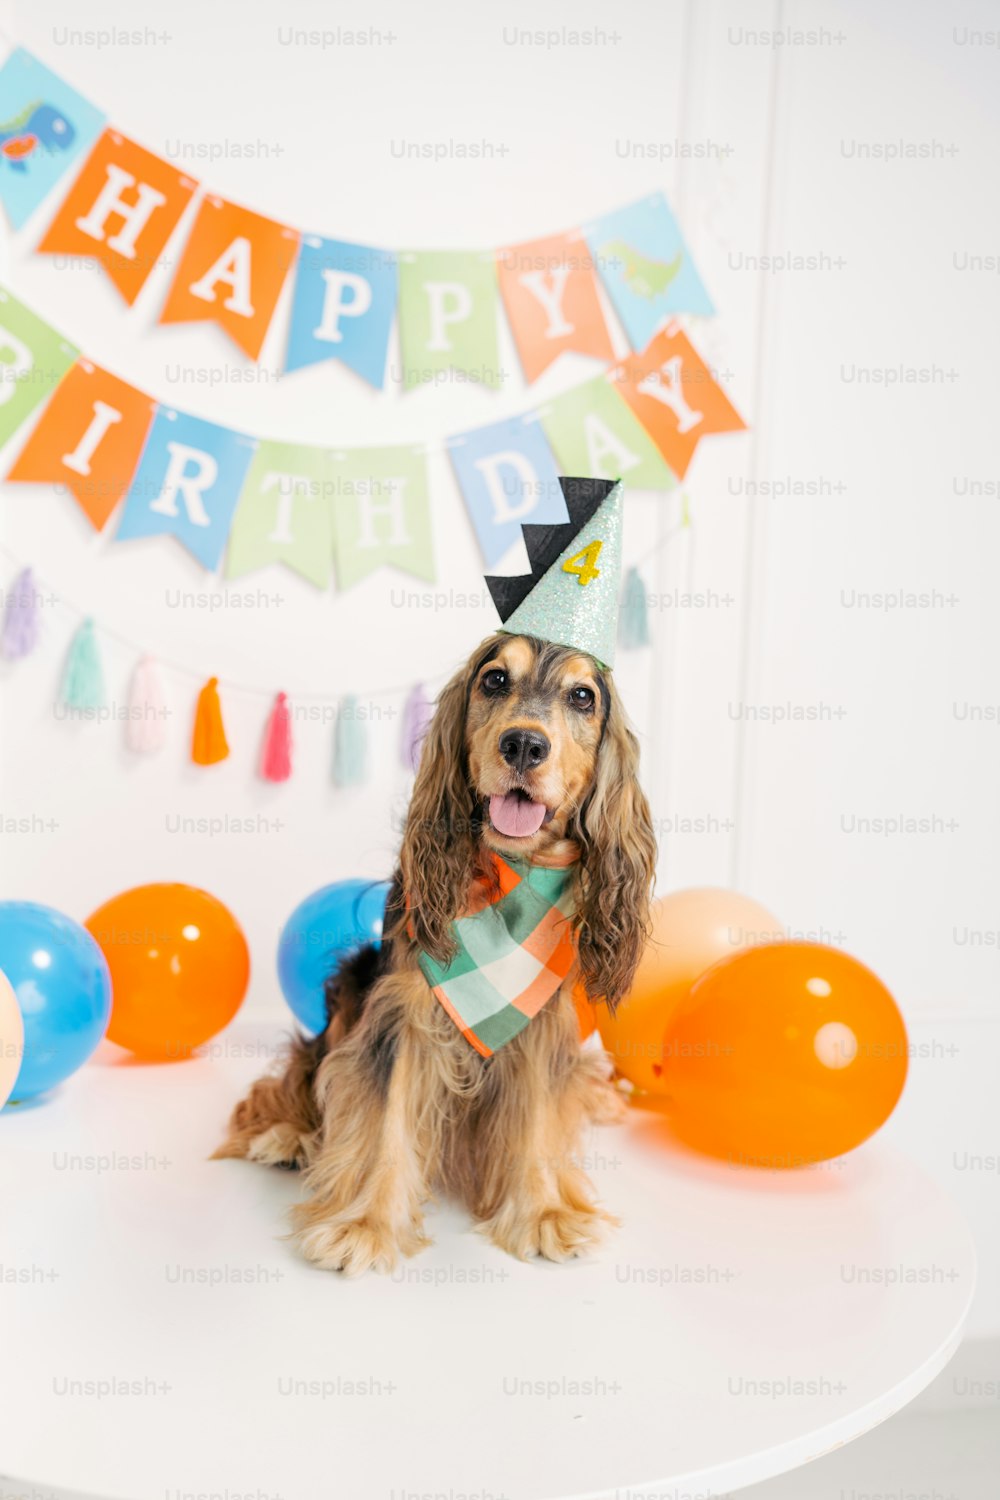 a dog wearing a birthday hat and scarf